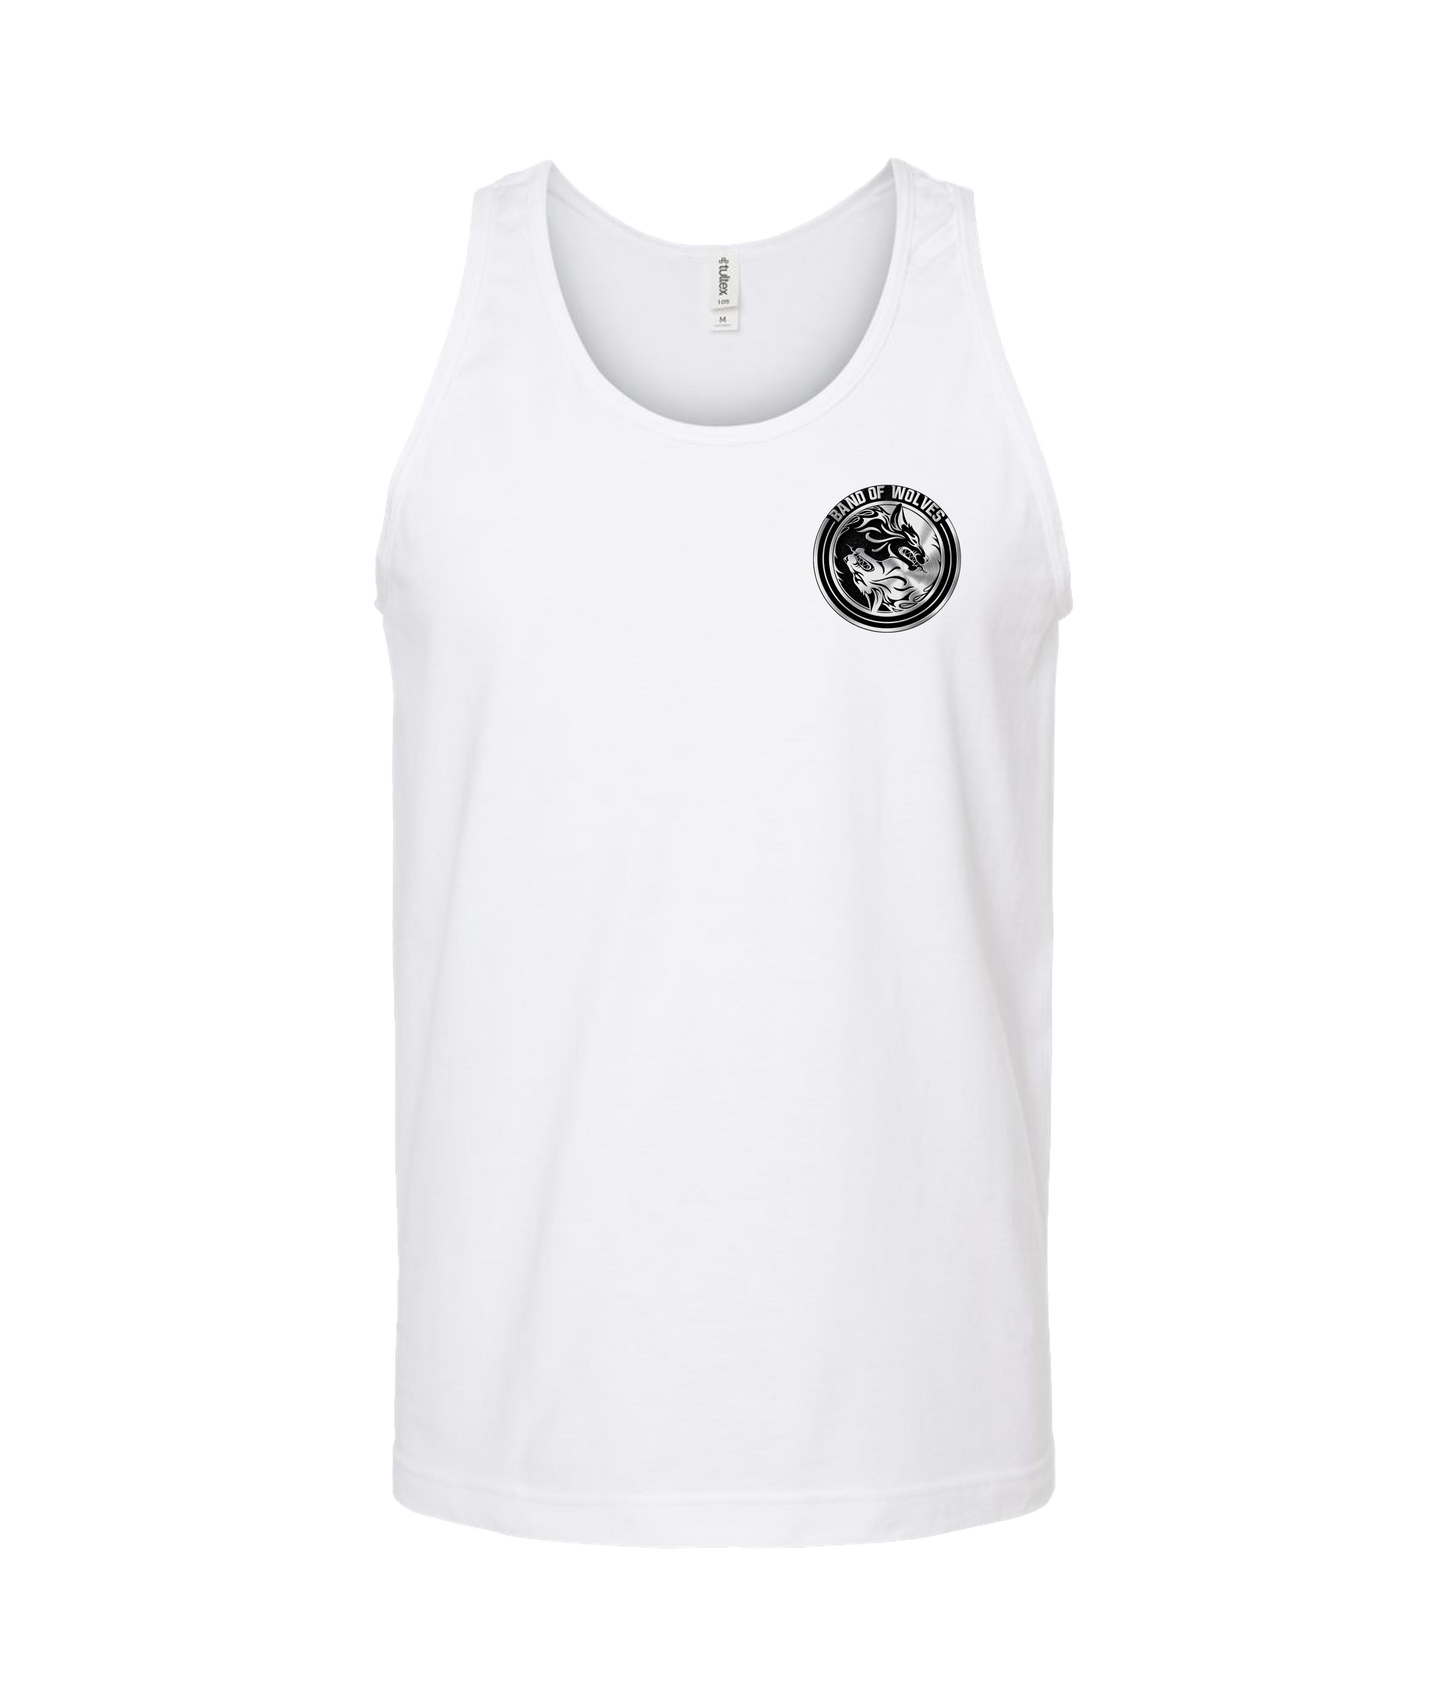 Band of Wolves - The Wolf - White Tank Top